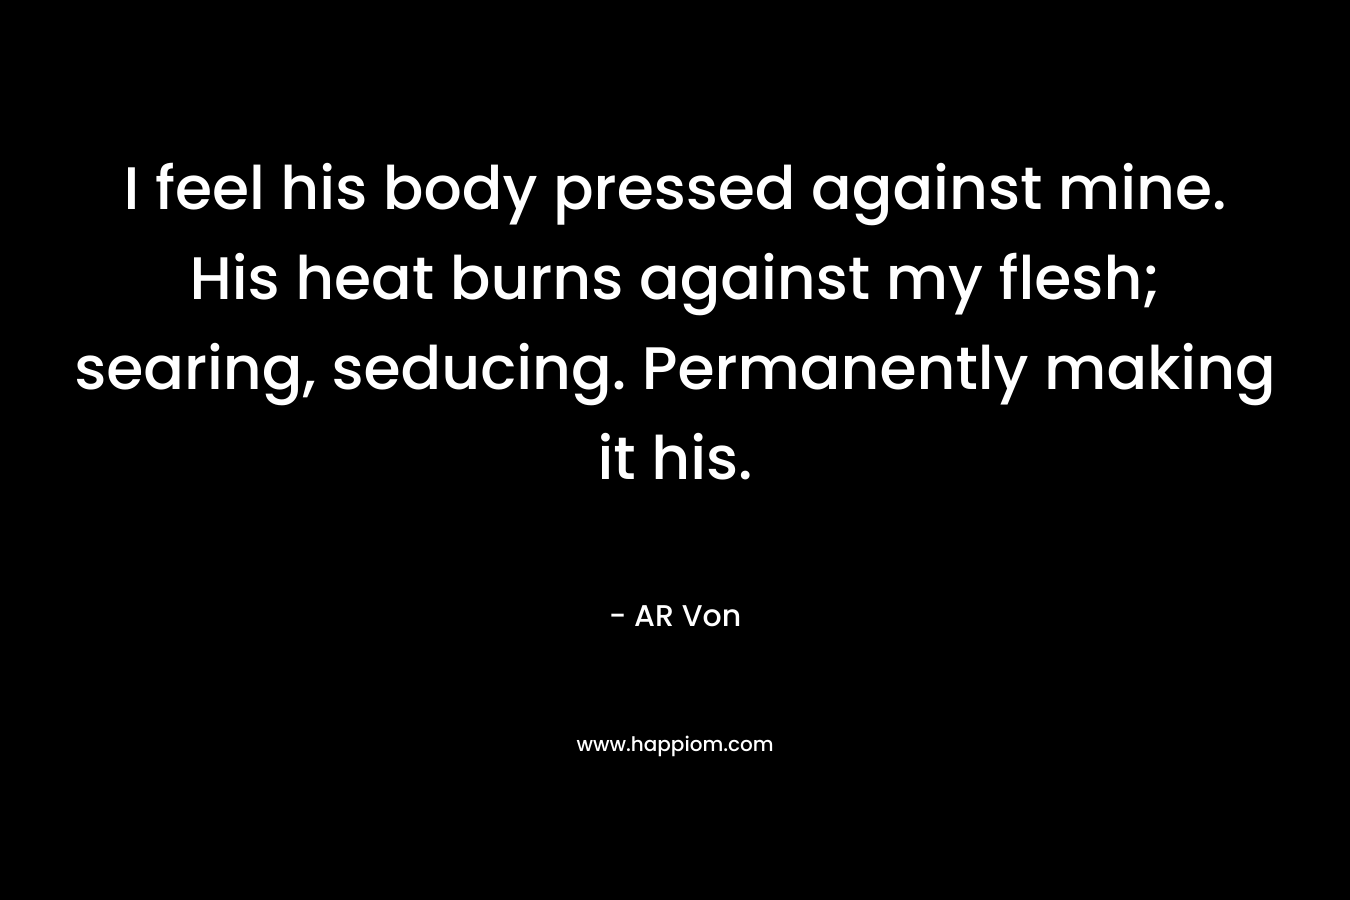 I feel his body pressed against mine. His heat burns against my flesh; searing, seducing. Permanently making it his. – AR Von